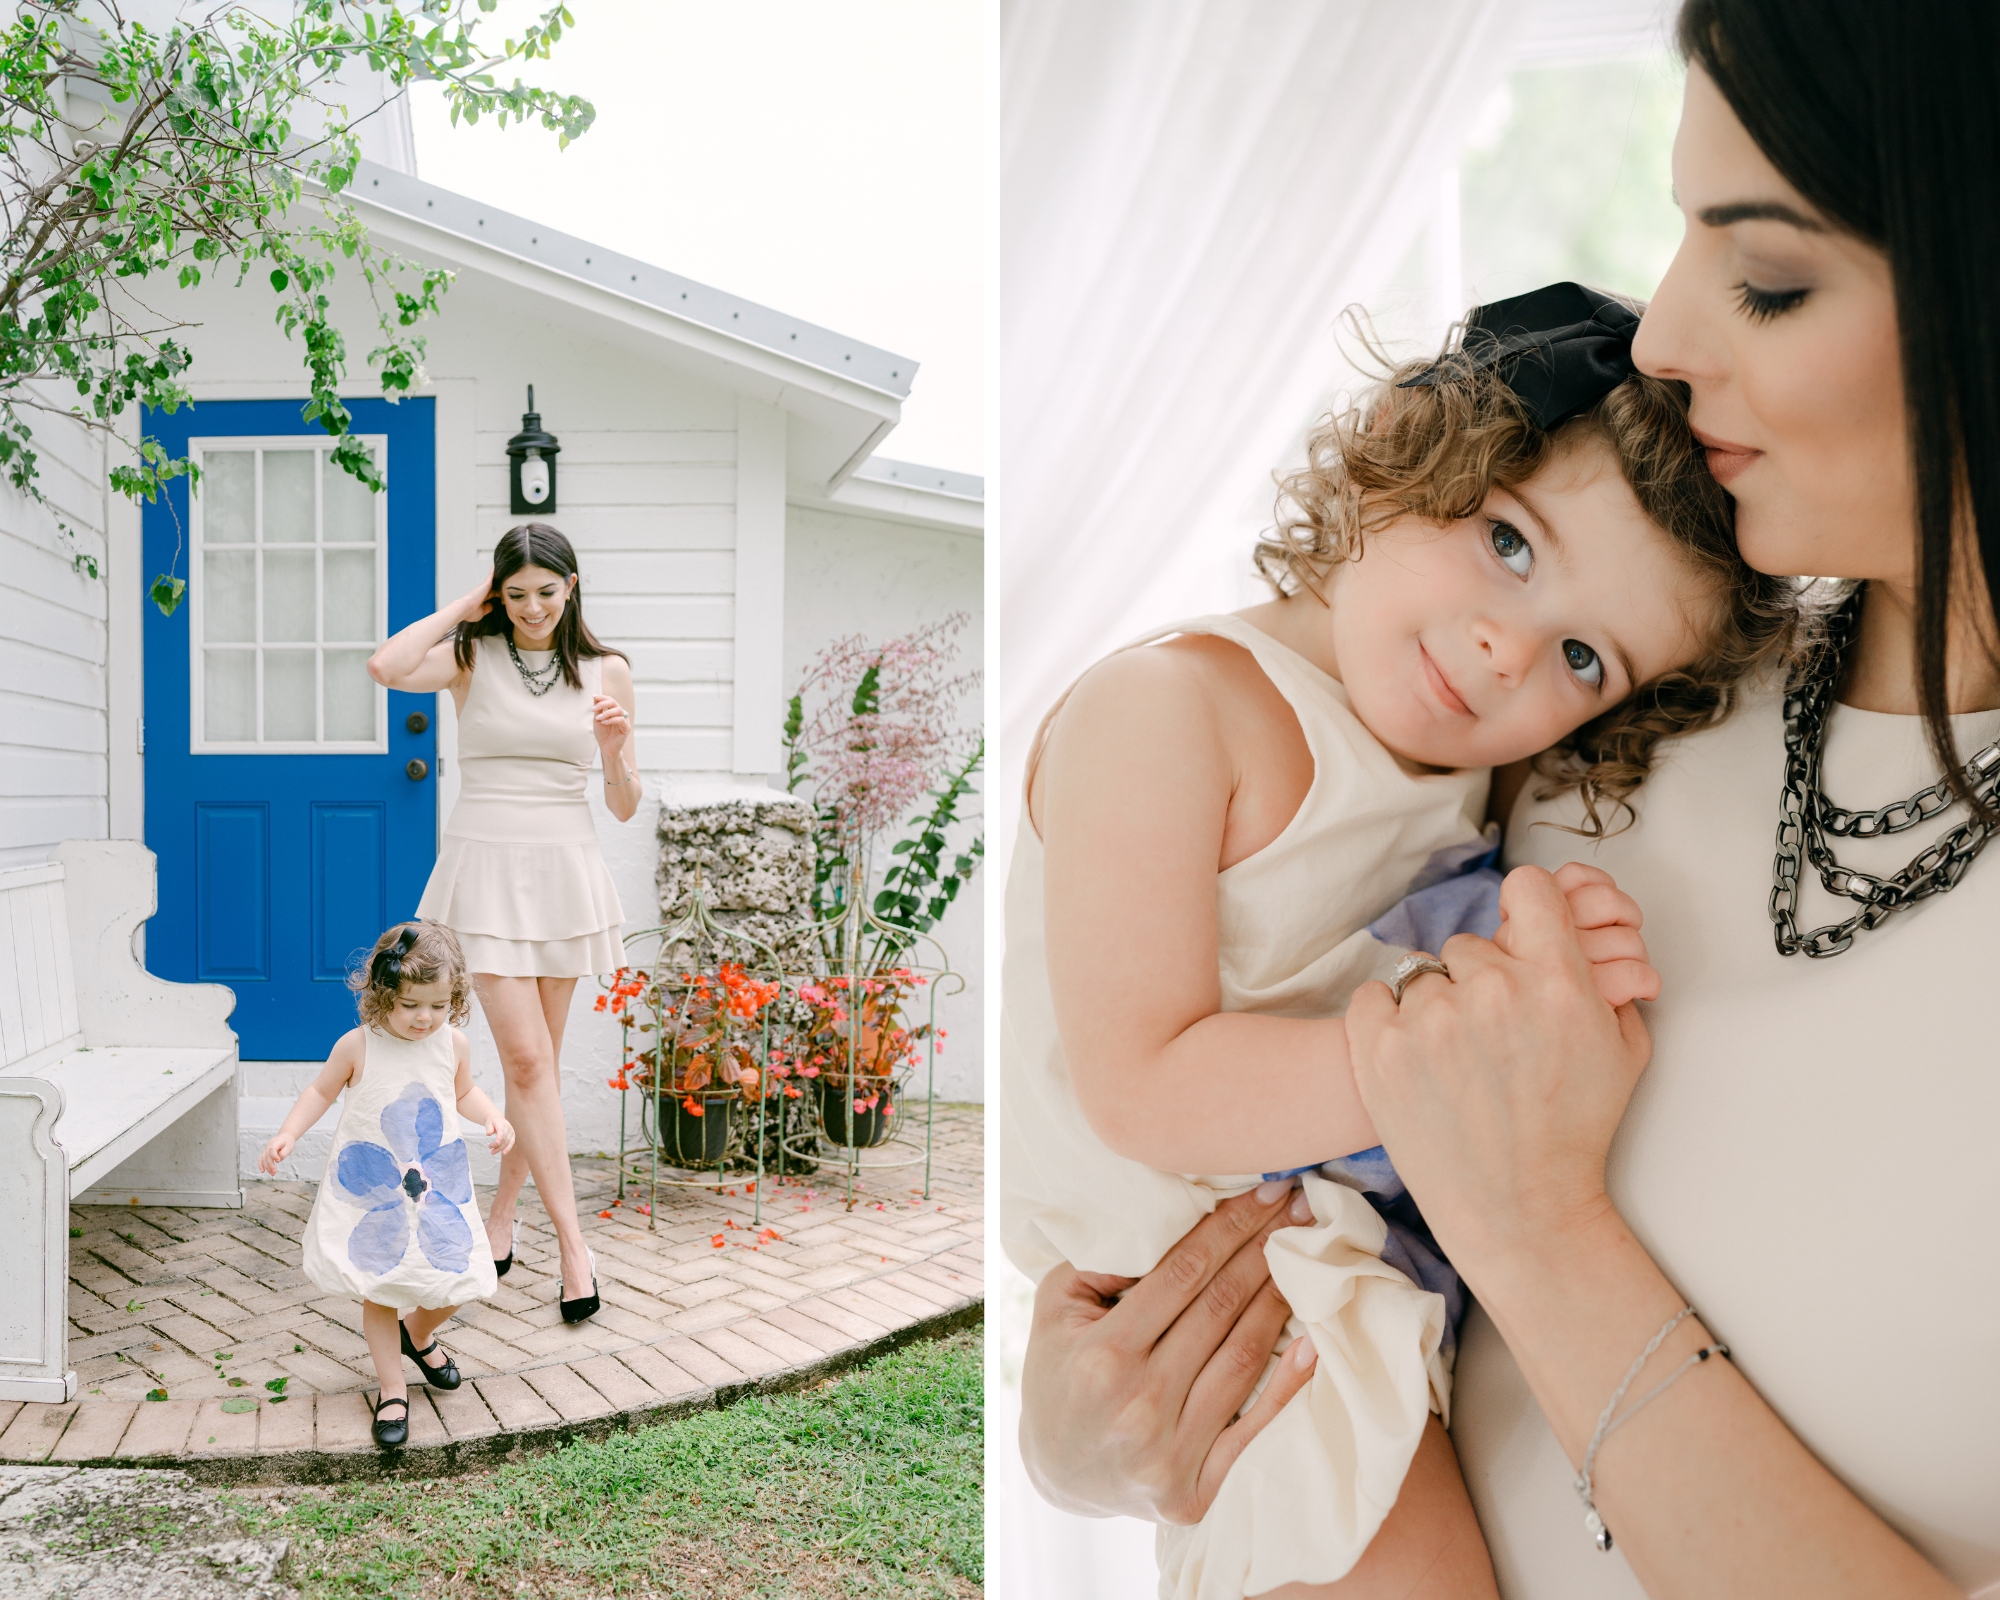 Miami Moms: Celebrate Motherhood with Mother's Day Photoshoot